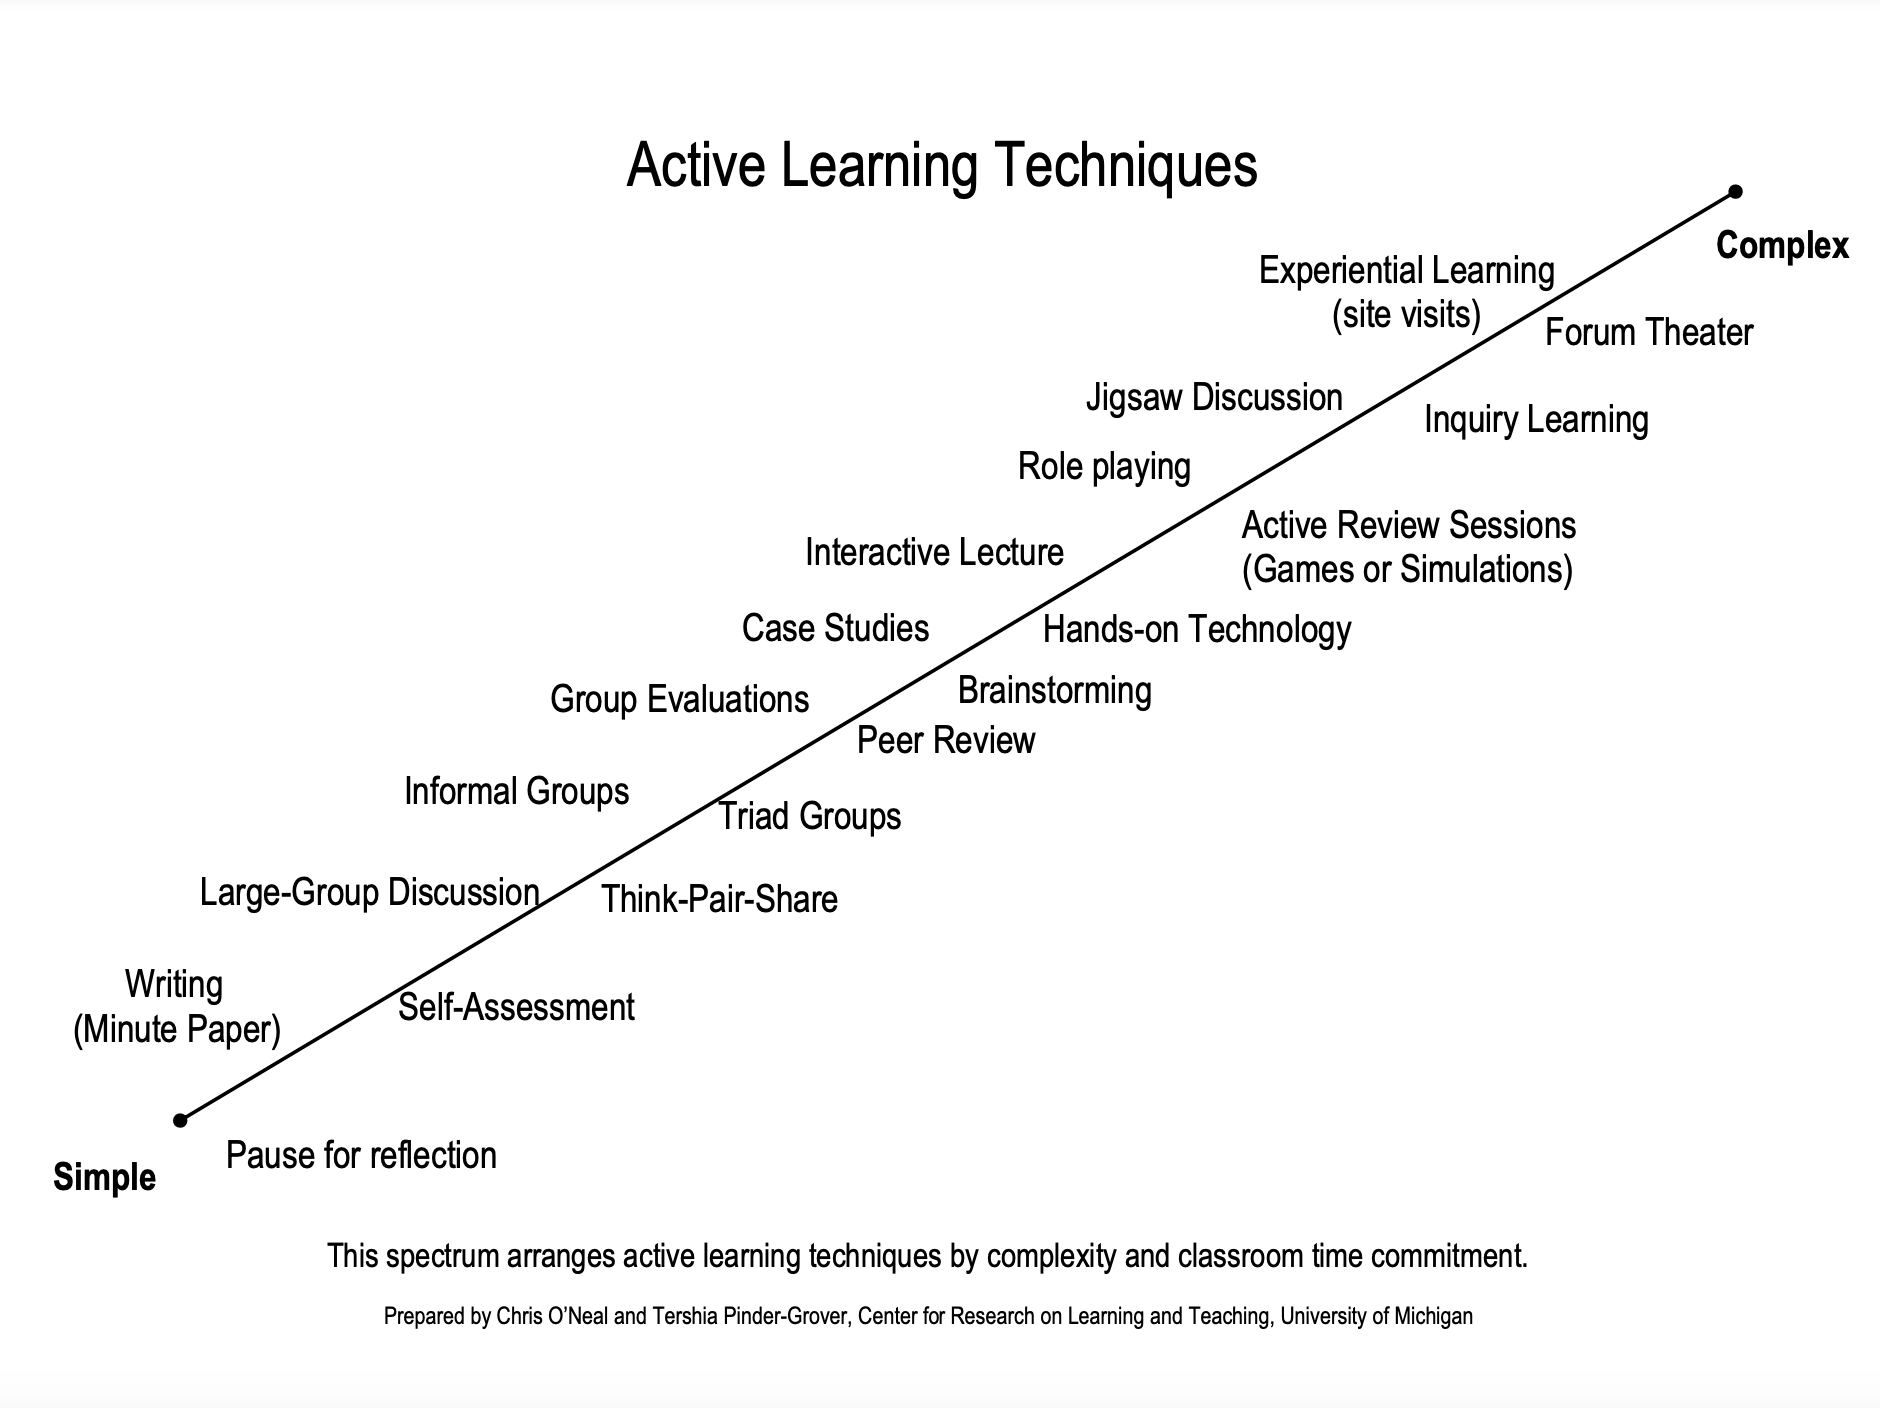 Active Learning from UMICH